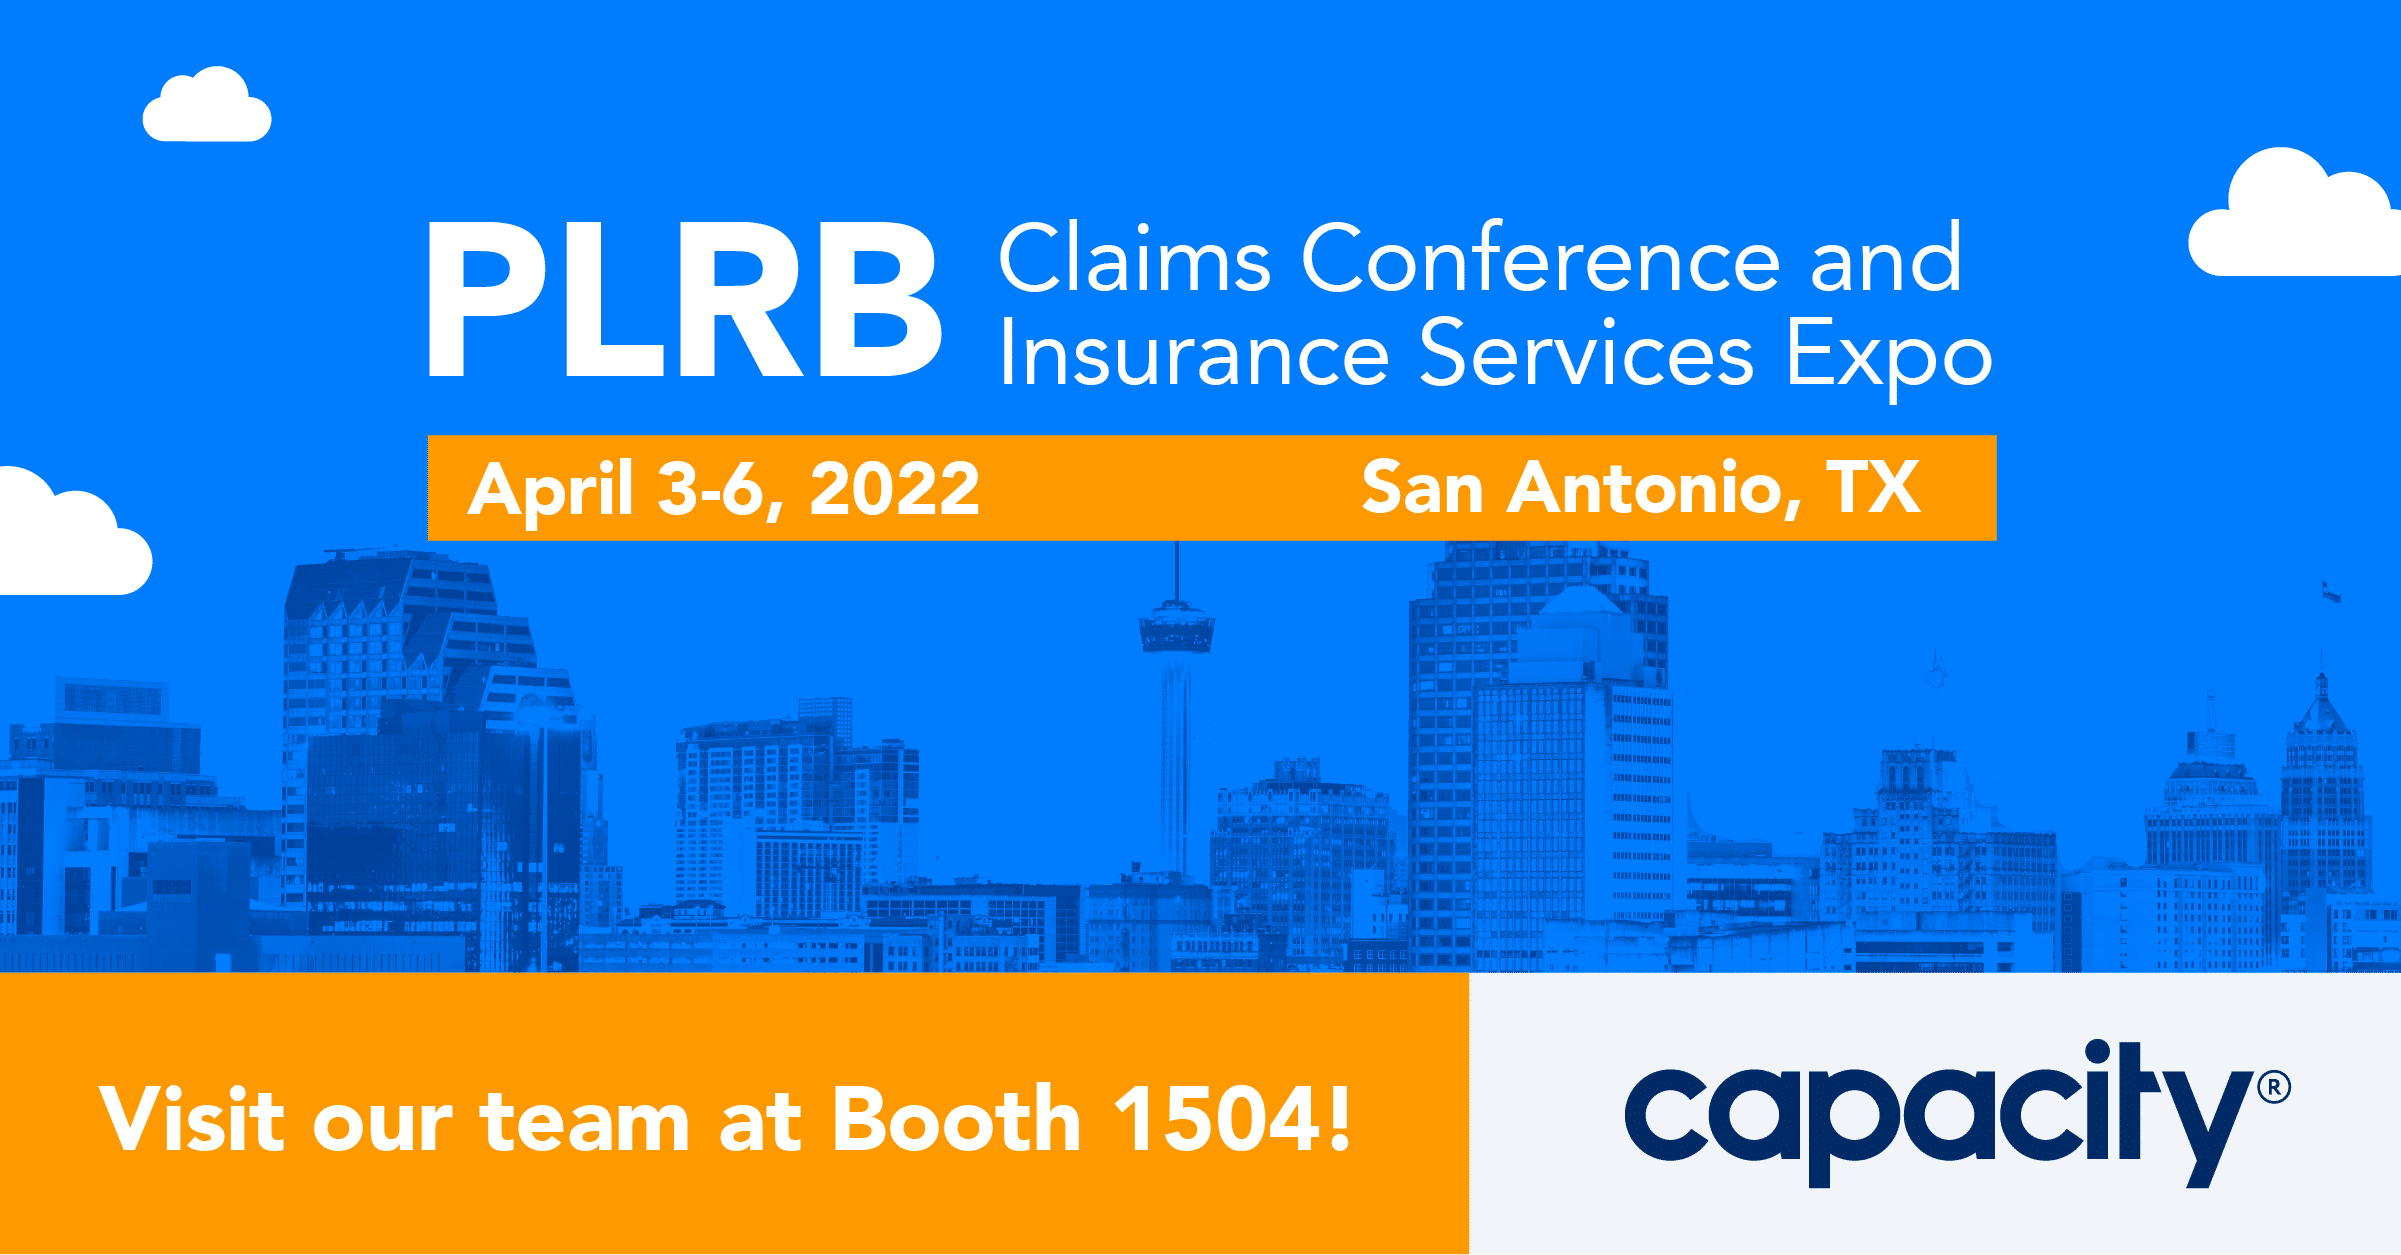 PLRB Claims Conference & Insurance Services Expo